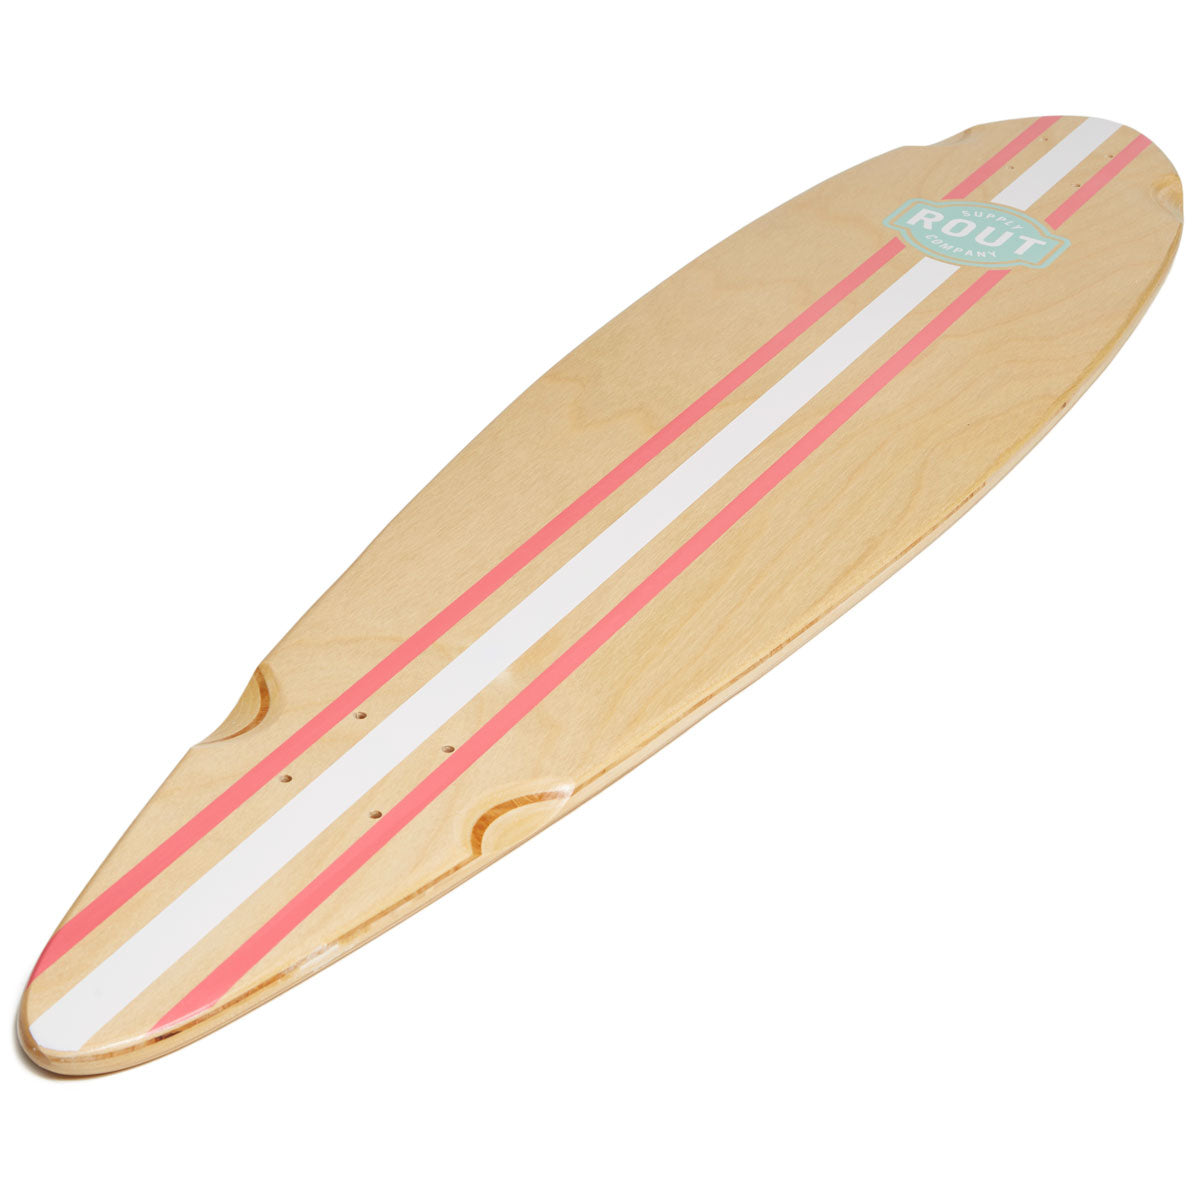 Rout Pinstripe Pintail Longboard Complete image 4